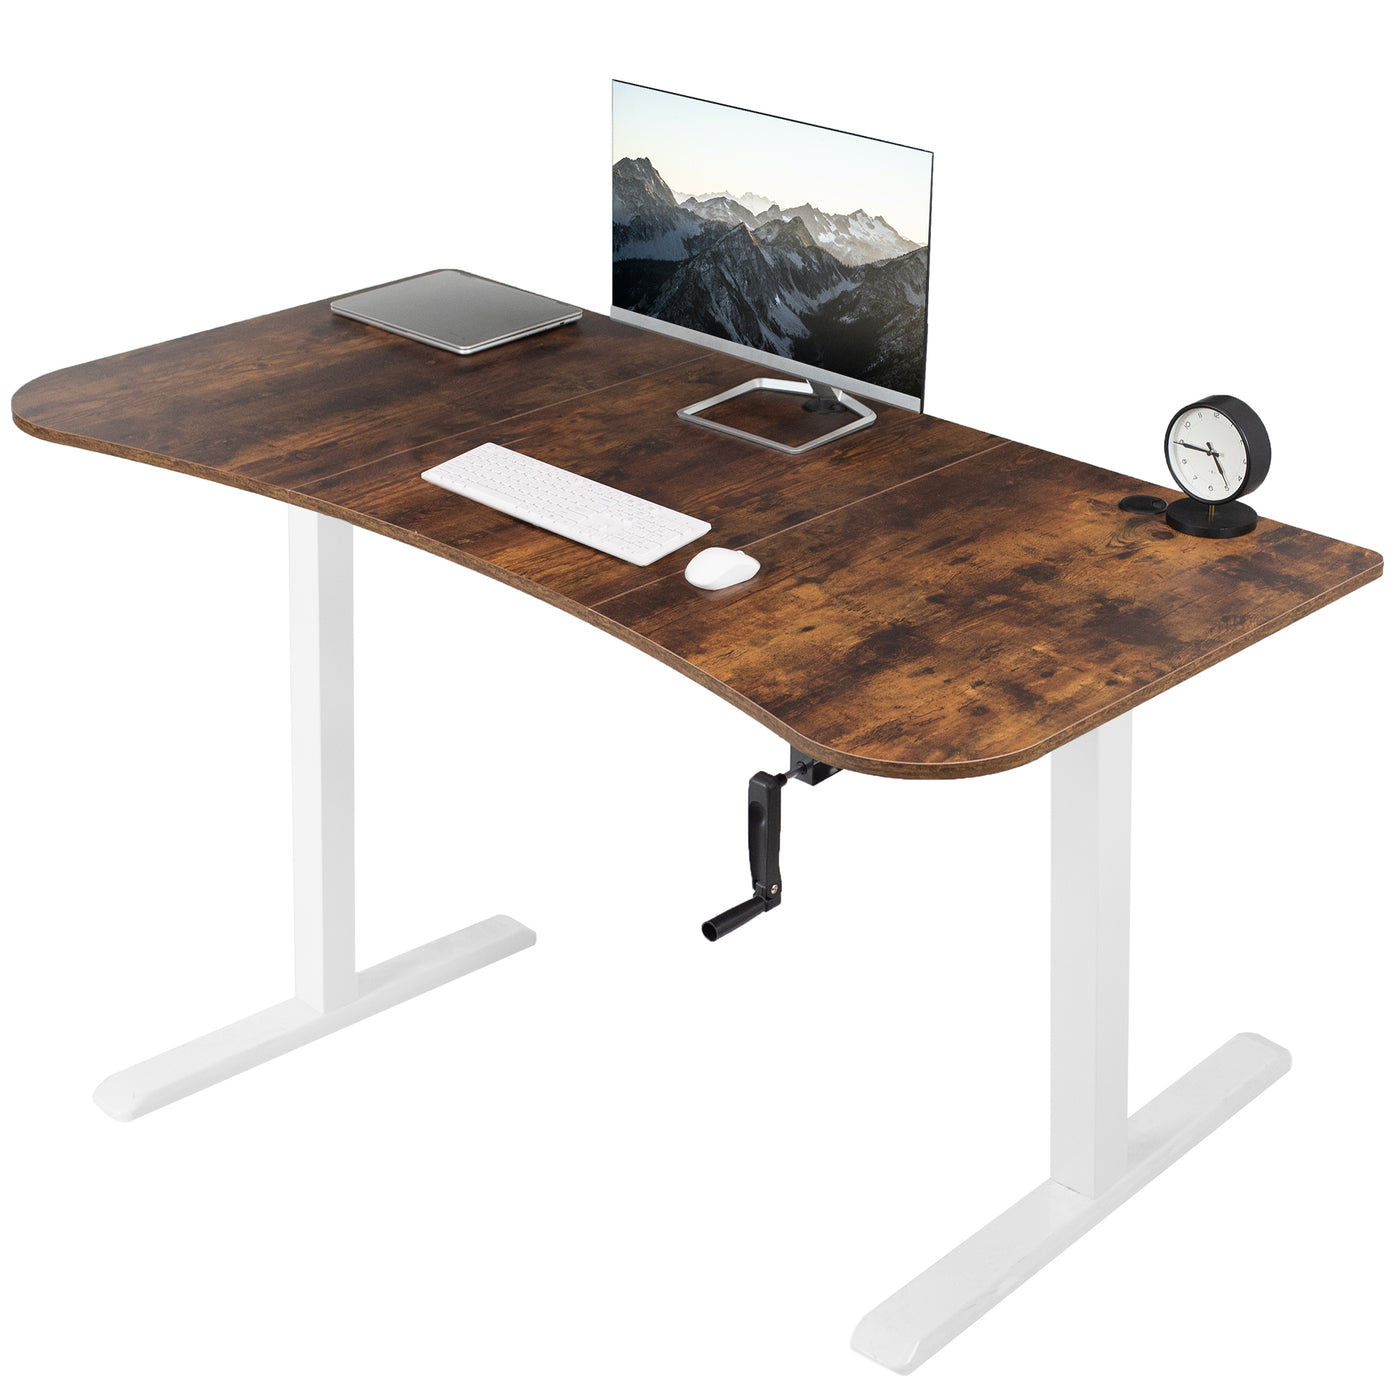 Sturdy rustic manual hand crank height adjustable desk for sit or stand workstation.